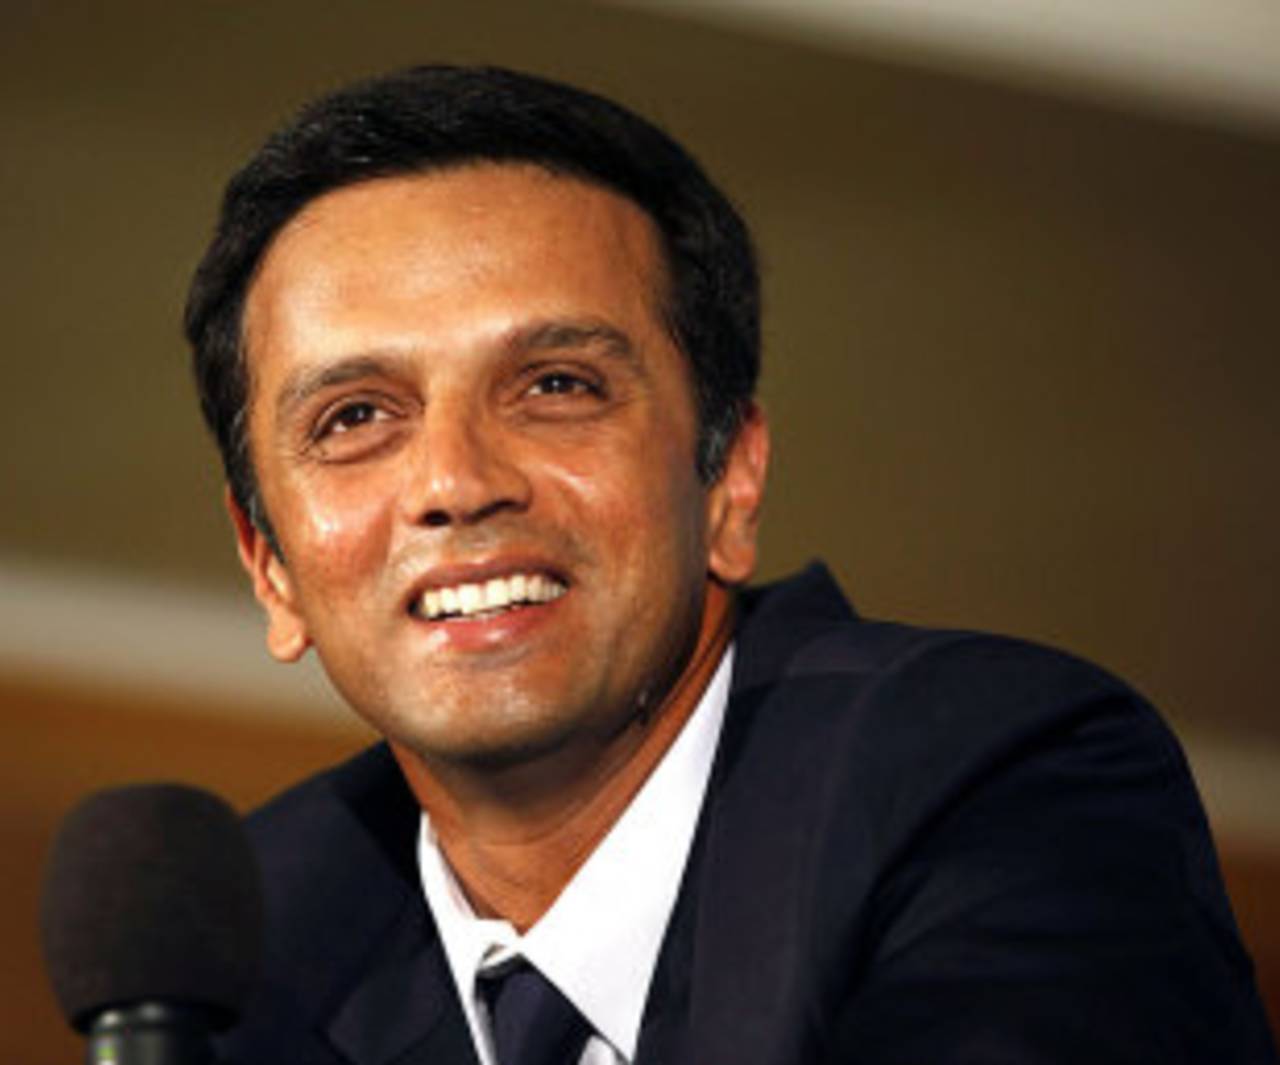 Rahul Dravid interacts with the media after announcing his retirement, Bangalore, March 9, 2012